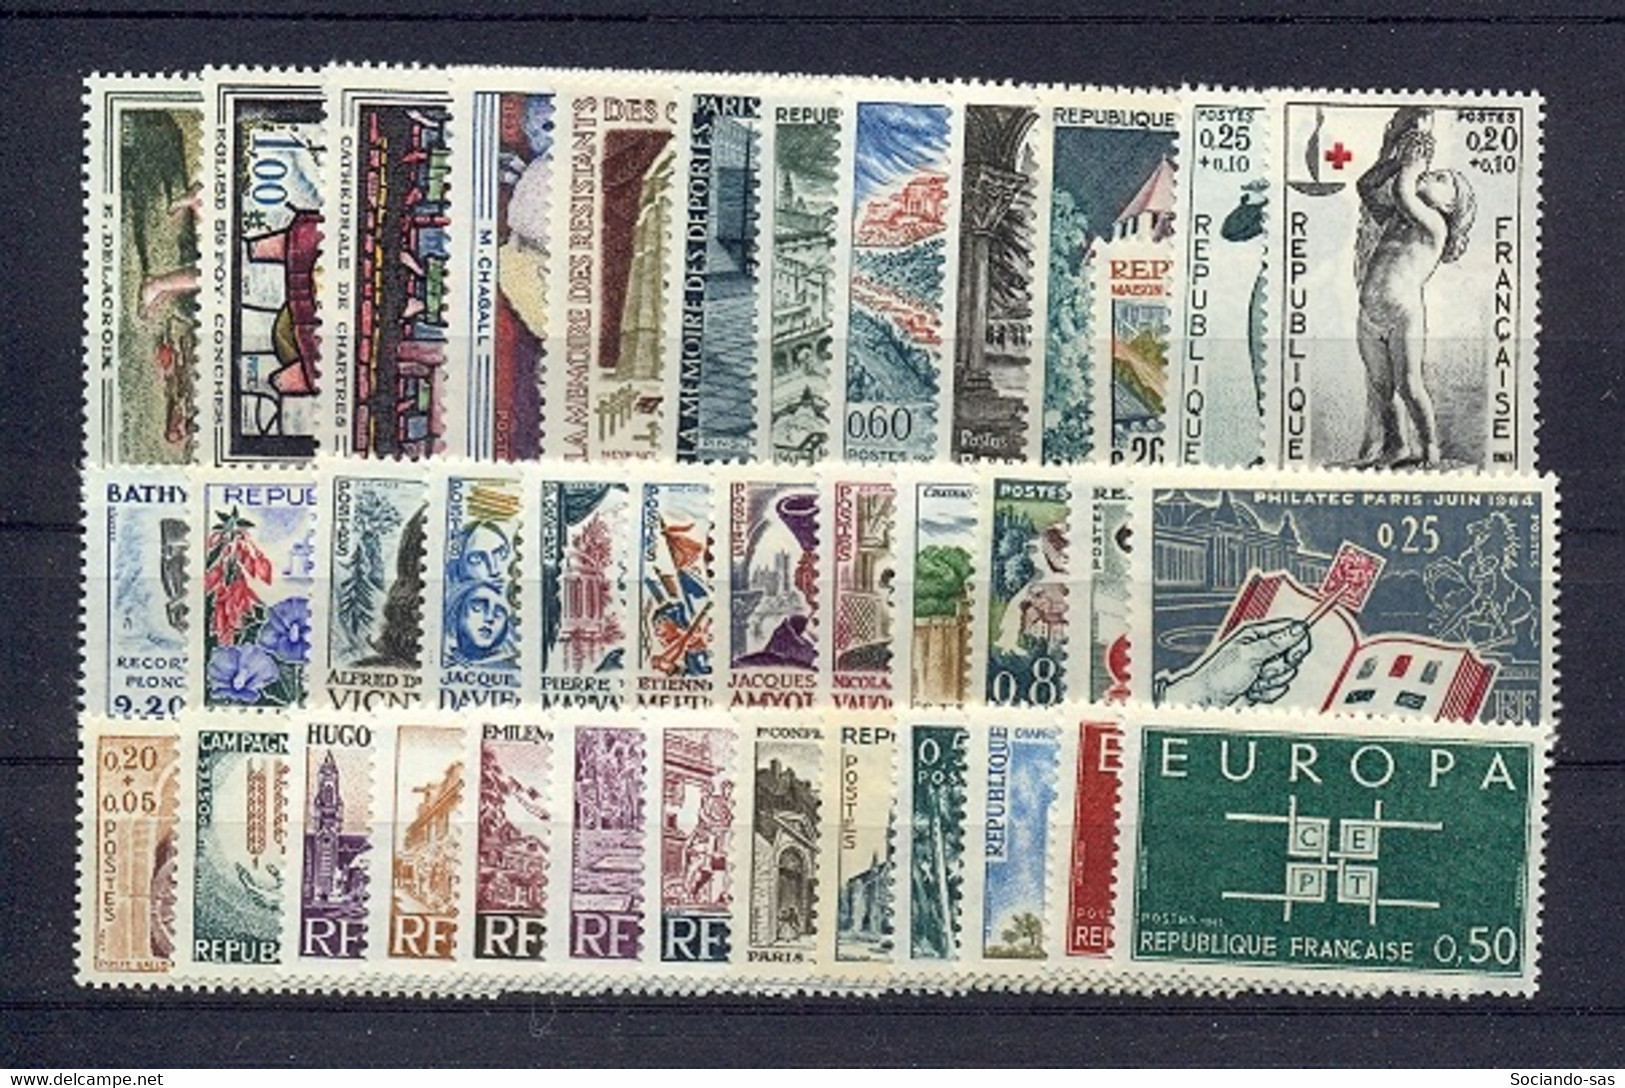 FRANCE - Année Complète 1963 - N°Yv. 1368 à 1403 - Complet - Neuf Luxe ** / MNH / Postfrisch - 1960-1969